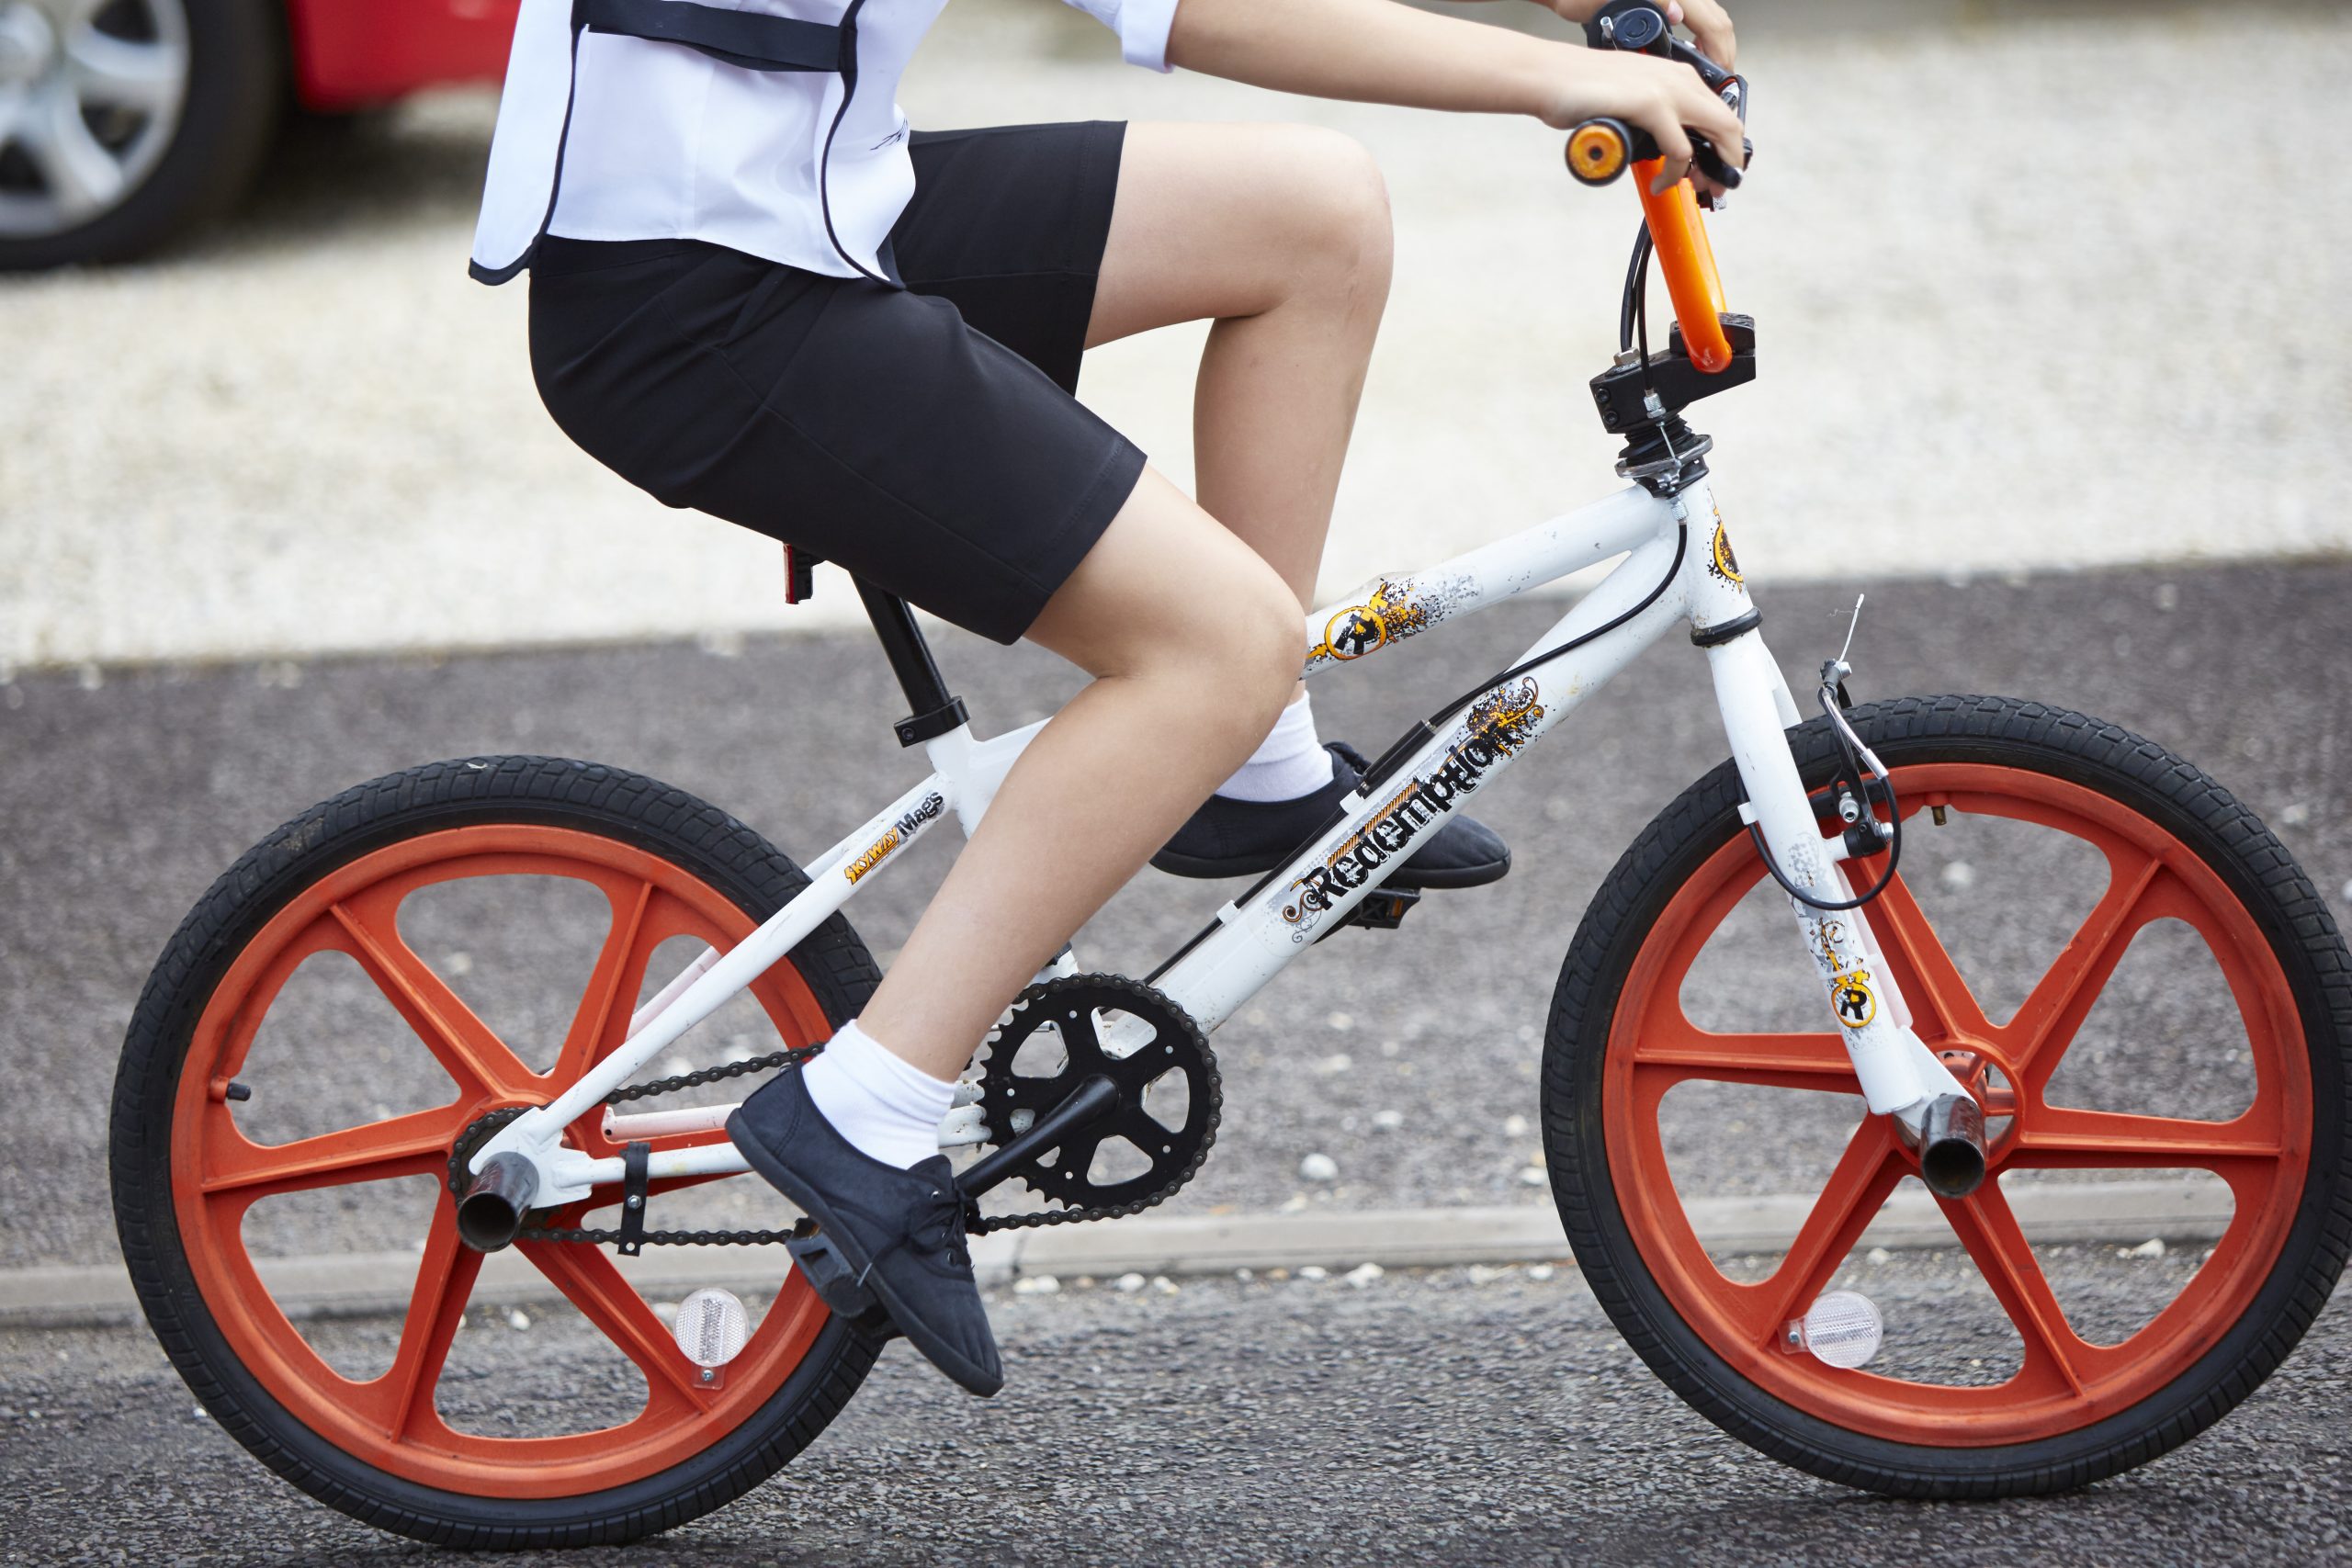 A close up image of a child riding a cycle, the image is focused on the frame of the cycle.